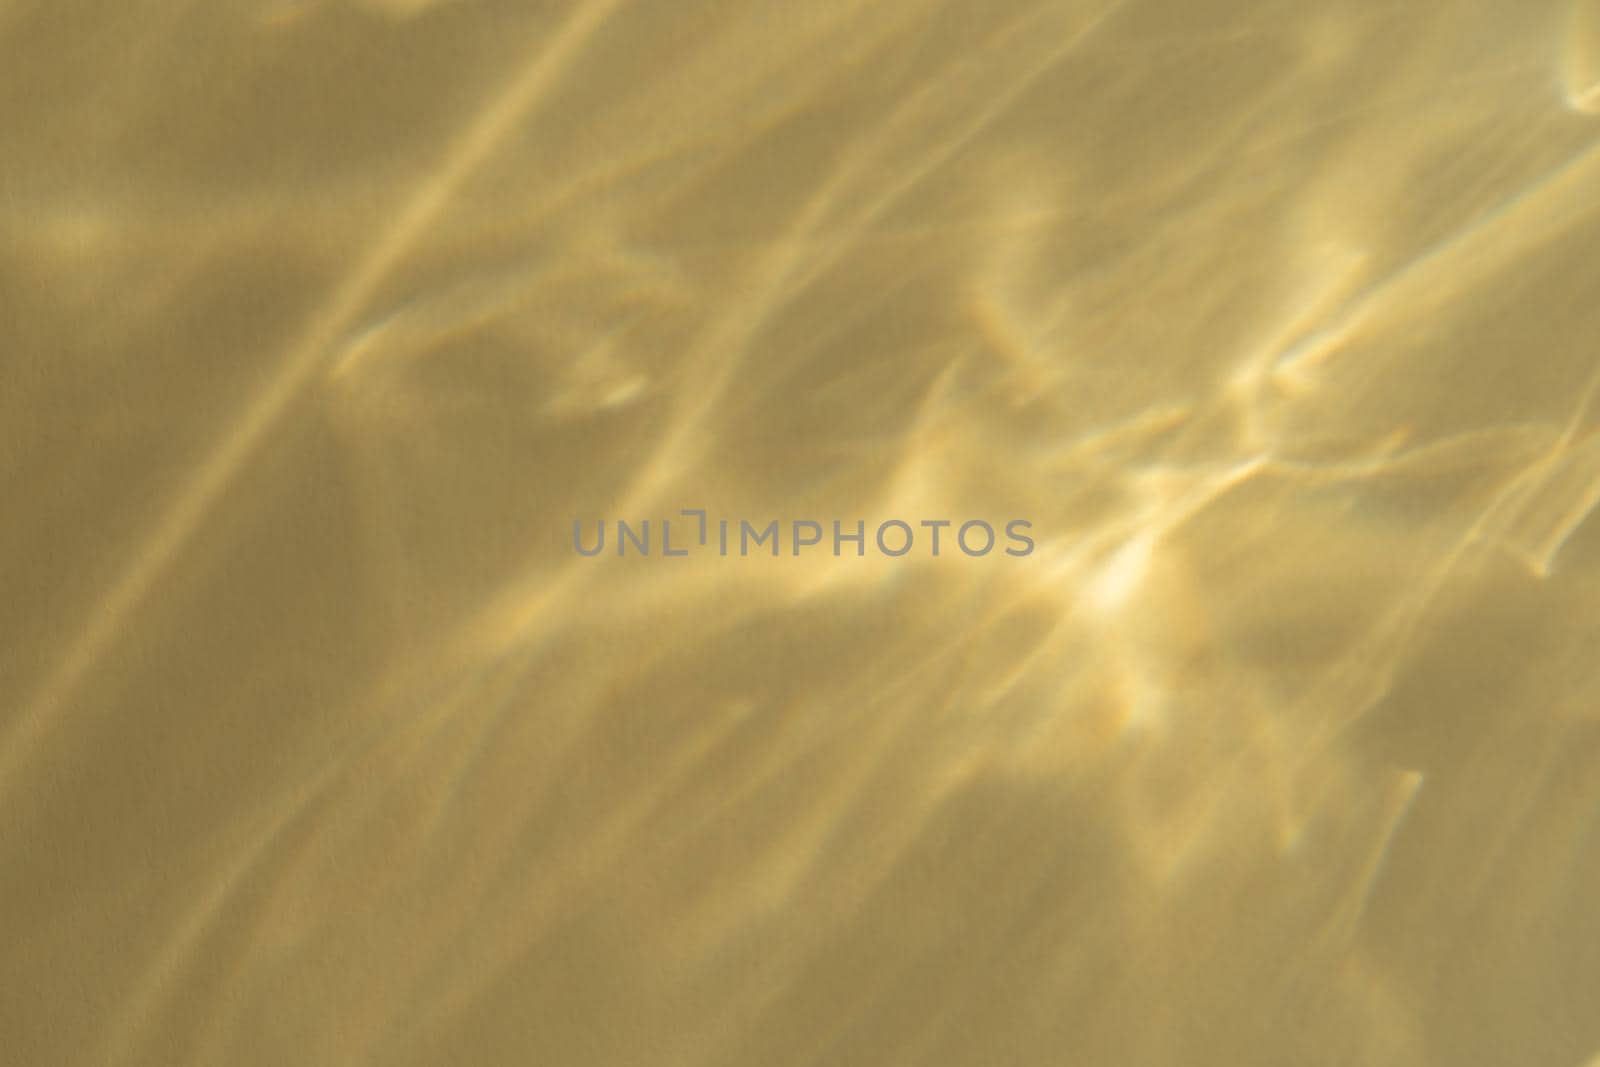 Caustic effect light refraction on yellow wall overlay photo mockup, blurred sun rays refracting through glass prism with shadow. Abstract natural light refraction silhouette on water surface by photolime